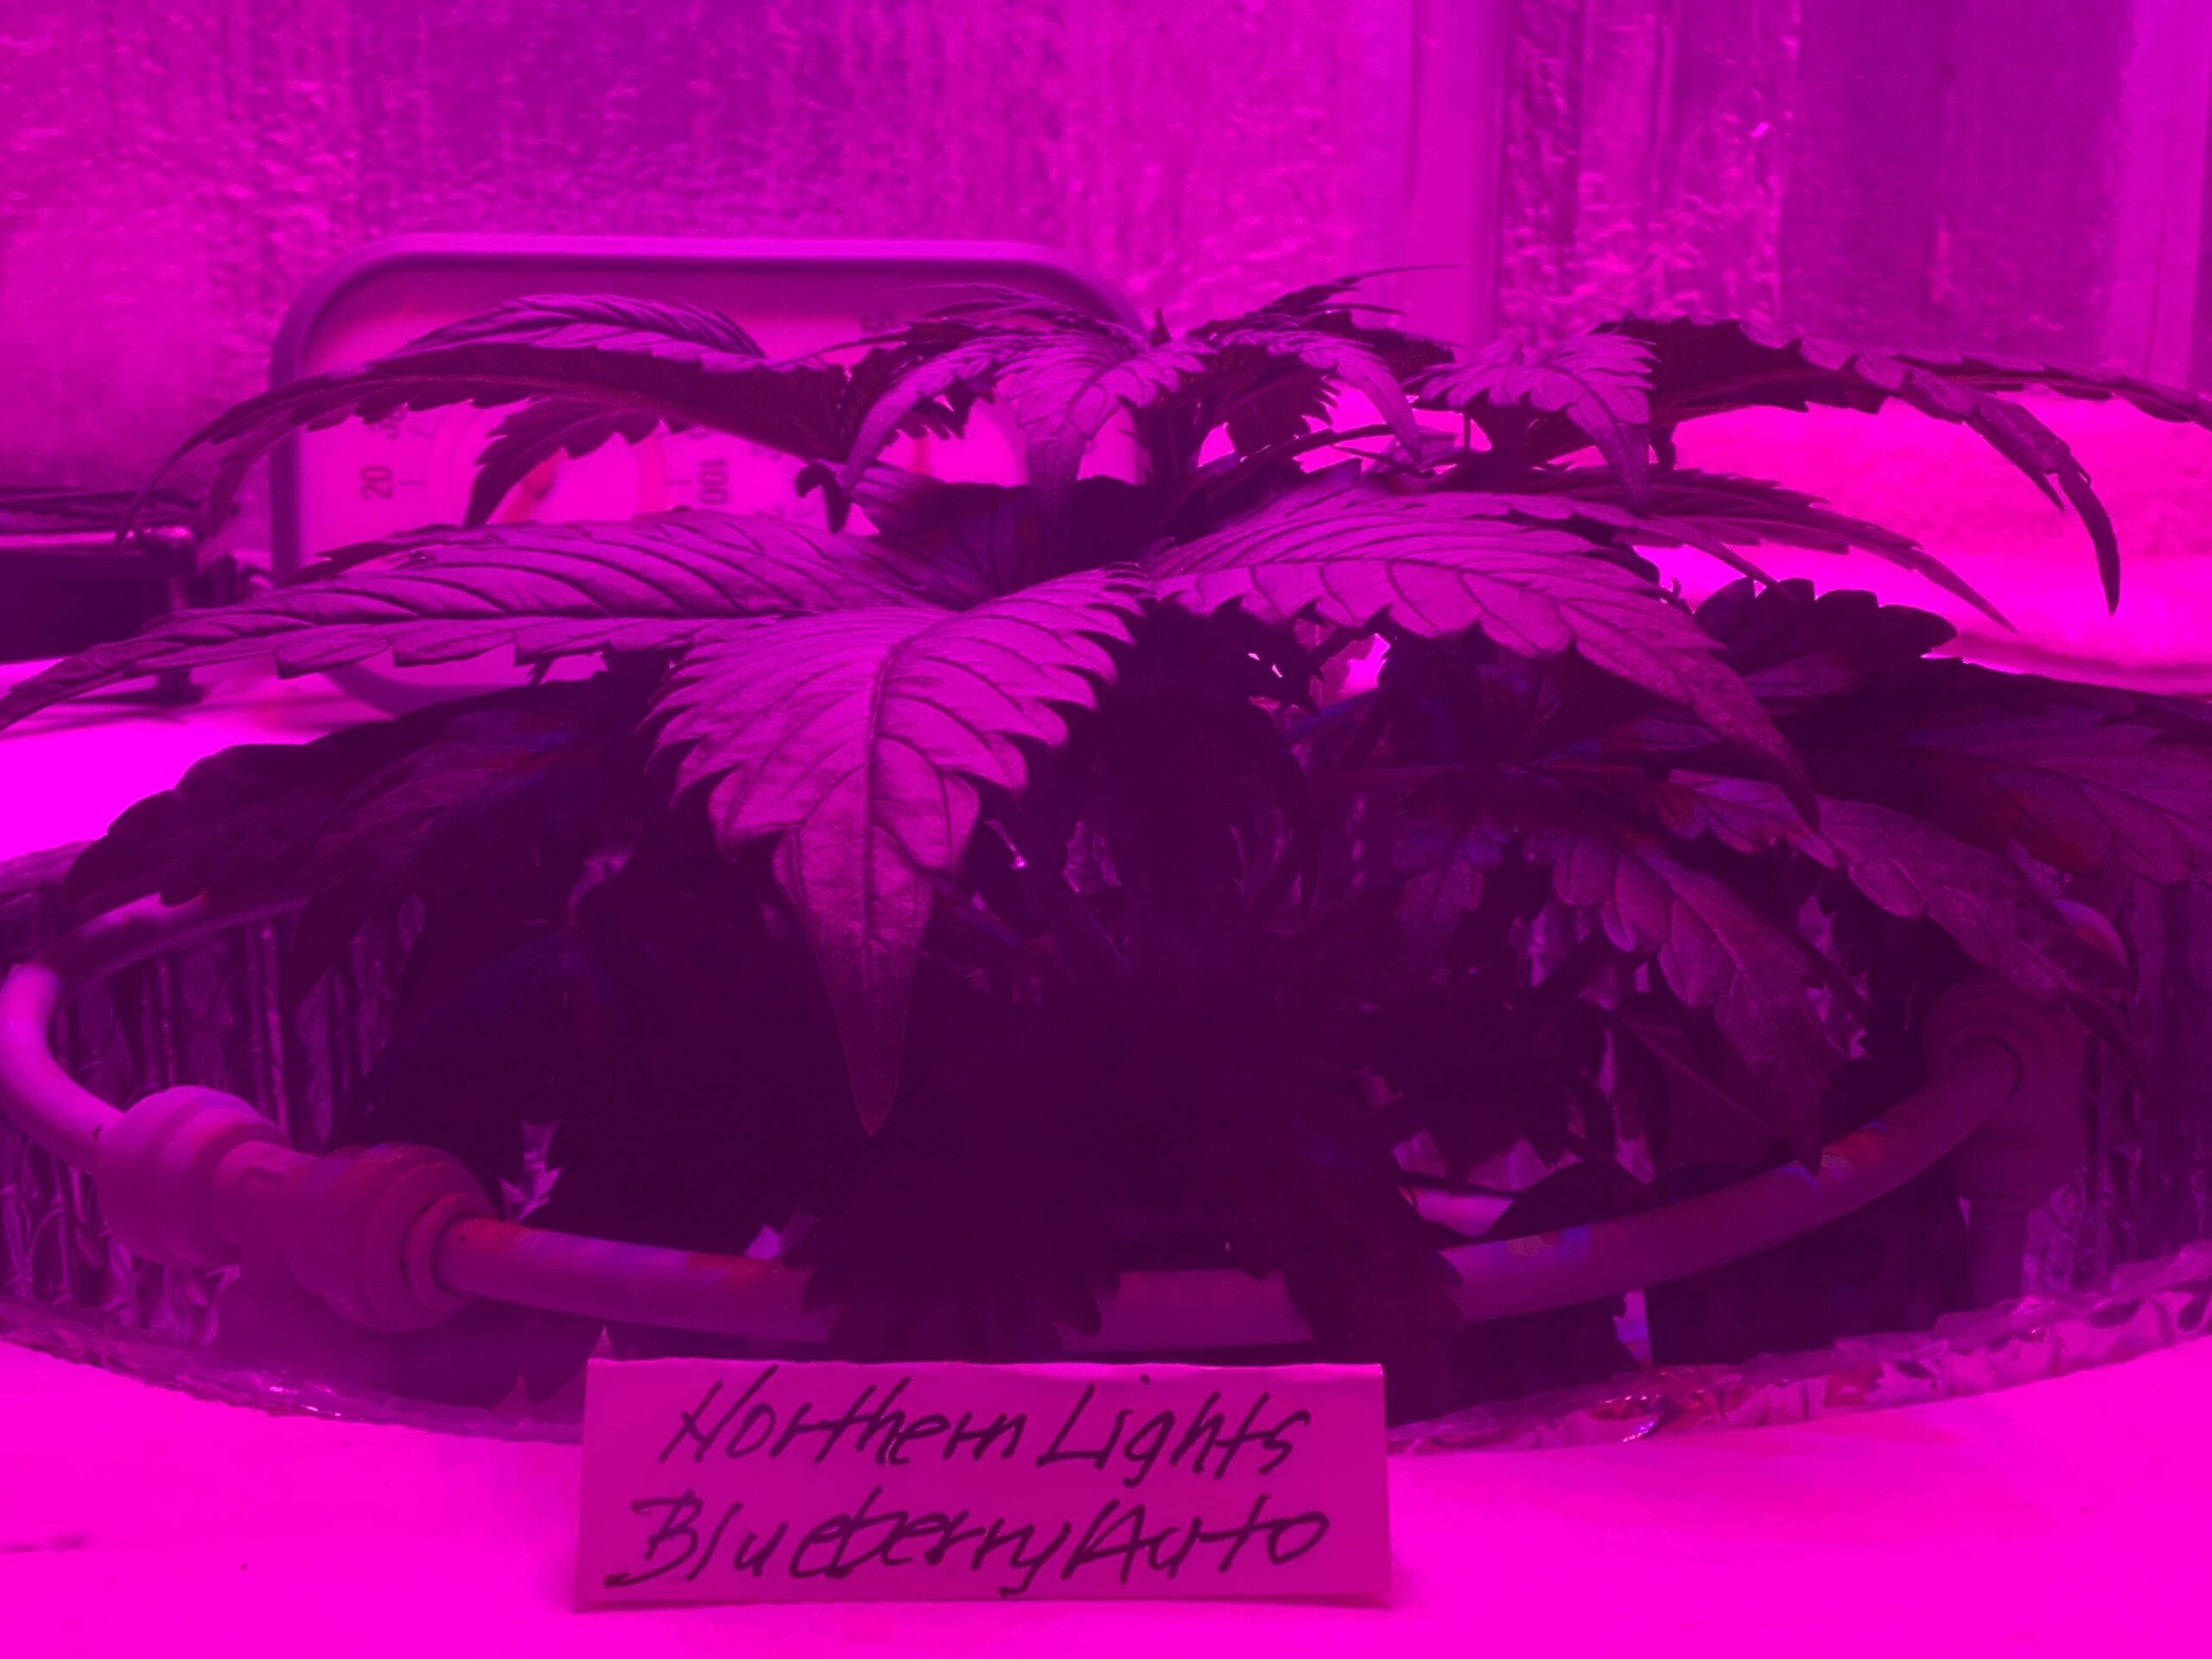 Northern Lights Blueberry Auto 24 days old